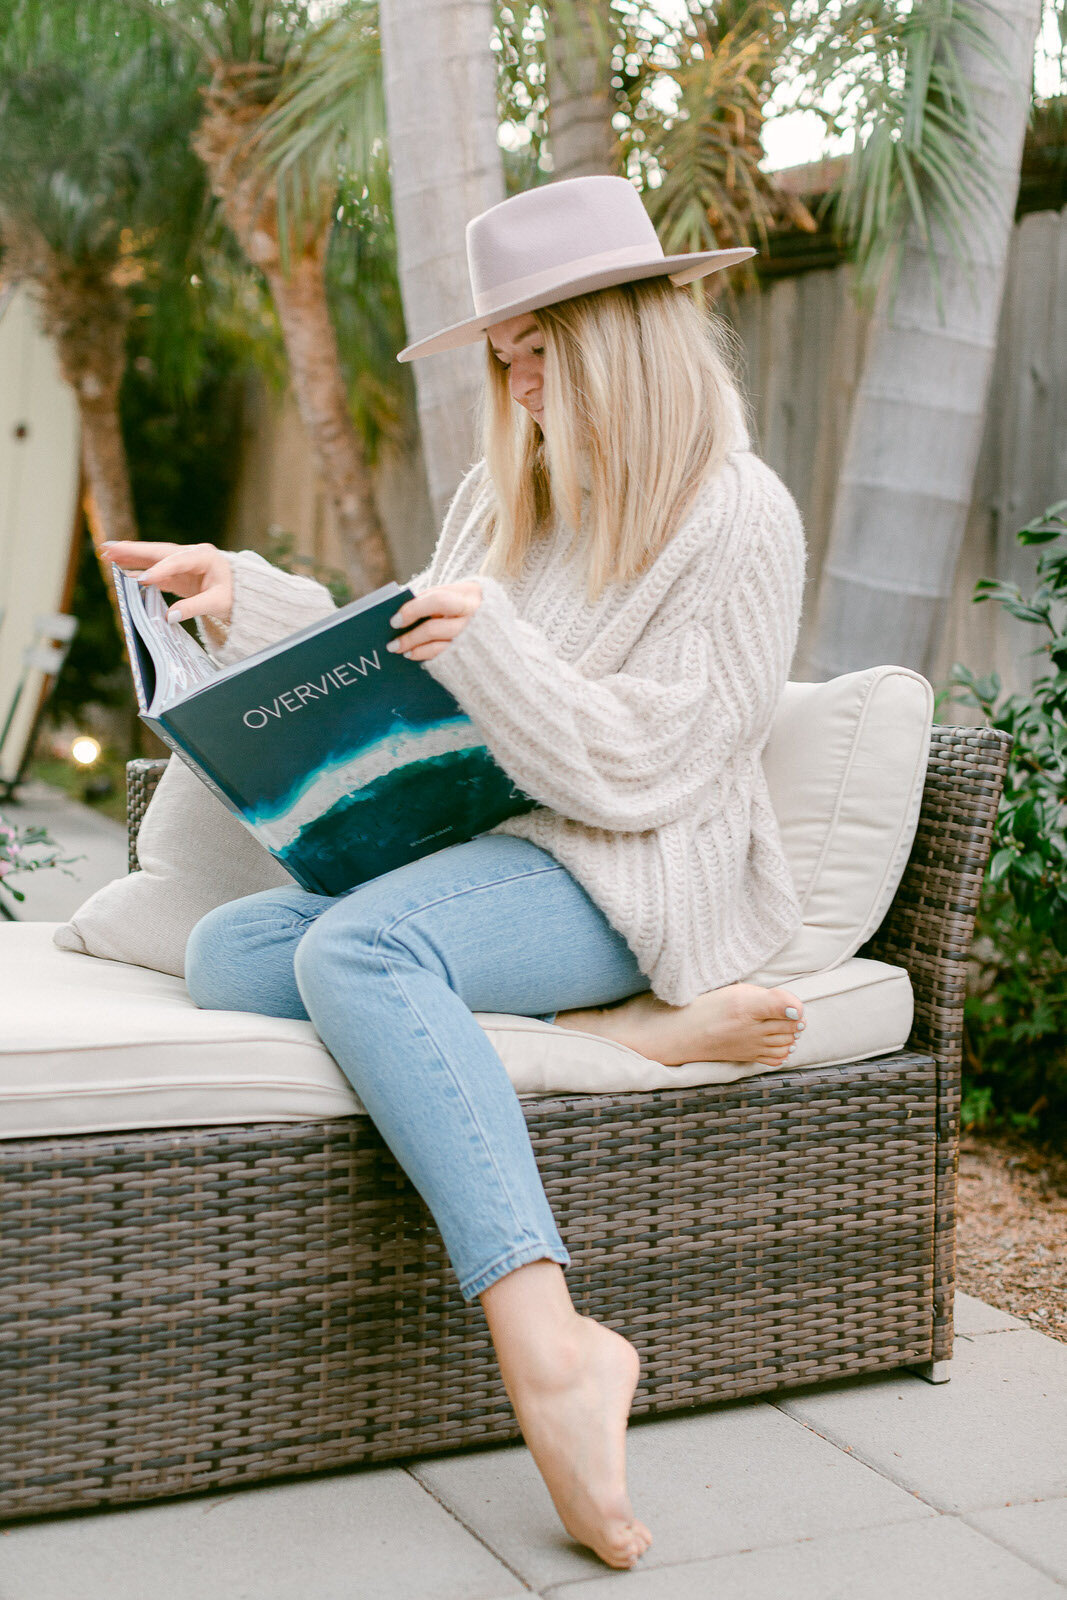 blonde girl reading surfing book on patio